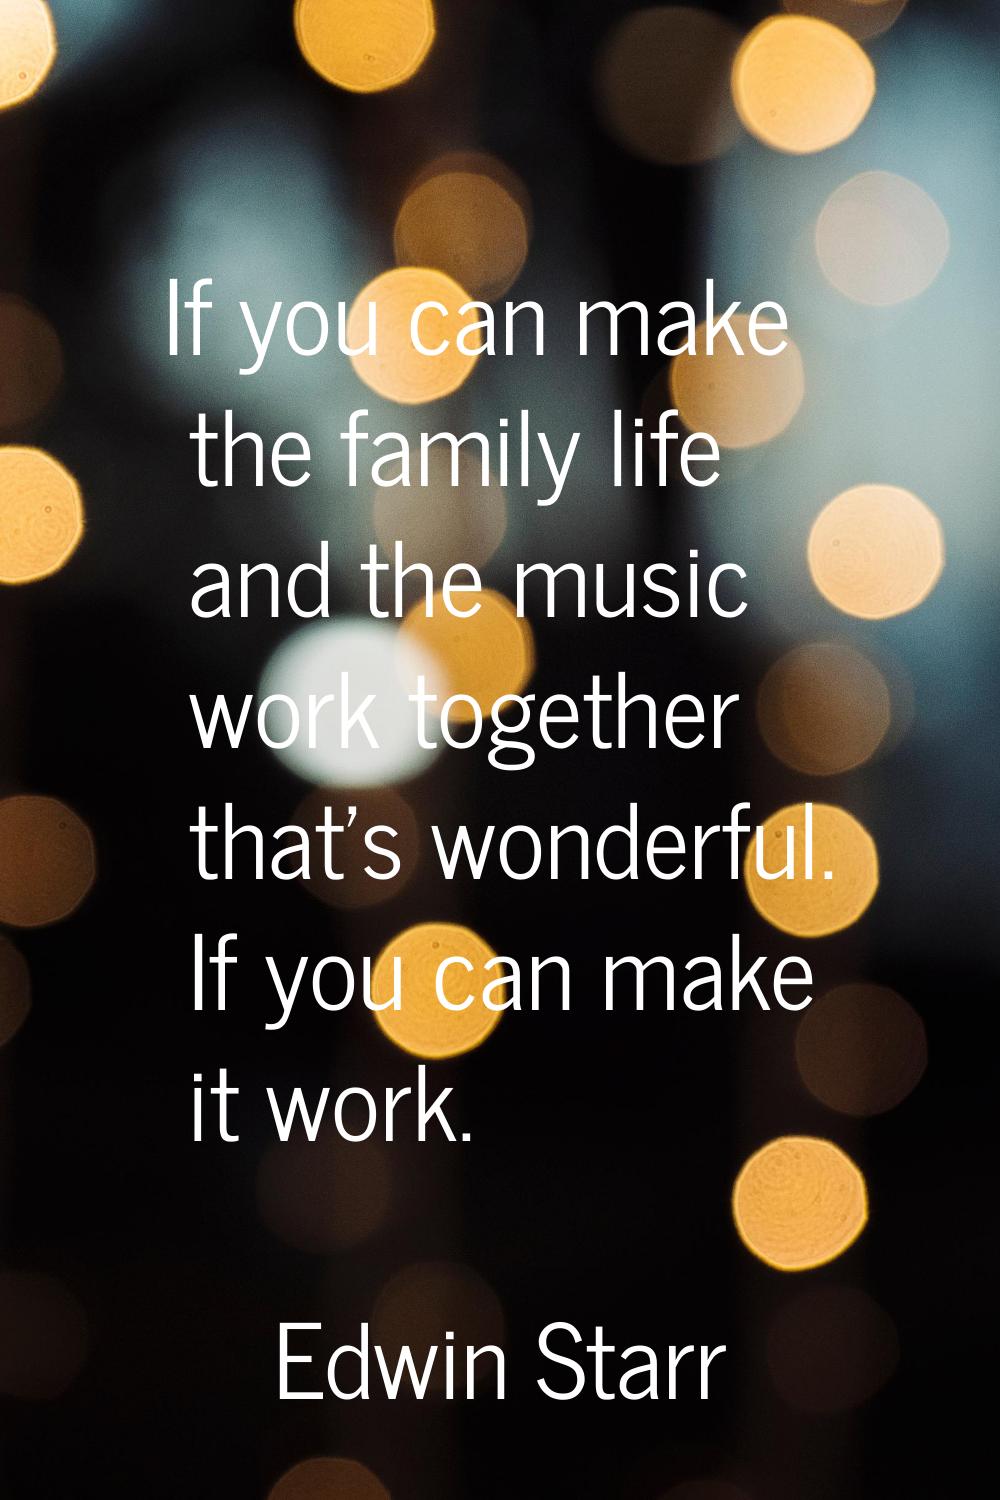 If you can make the family life and the music work together that's wonderful. If you can make it wo